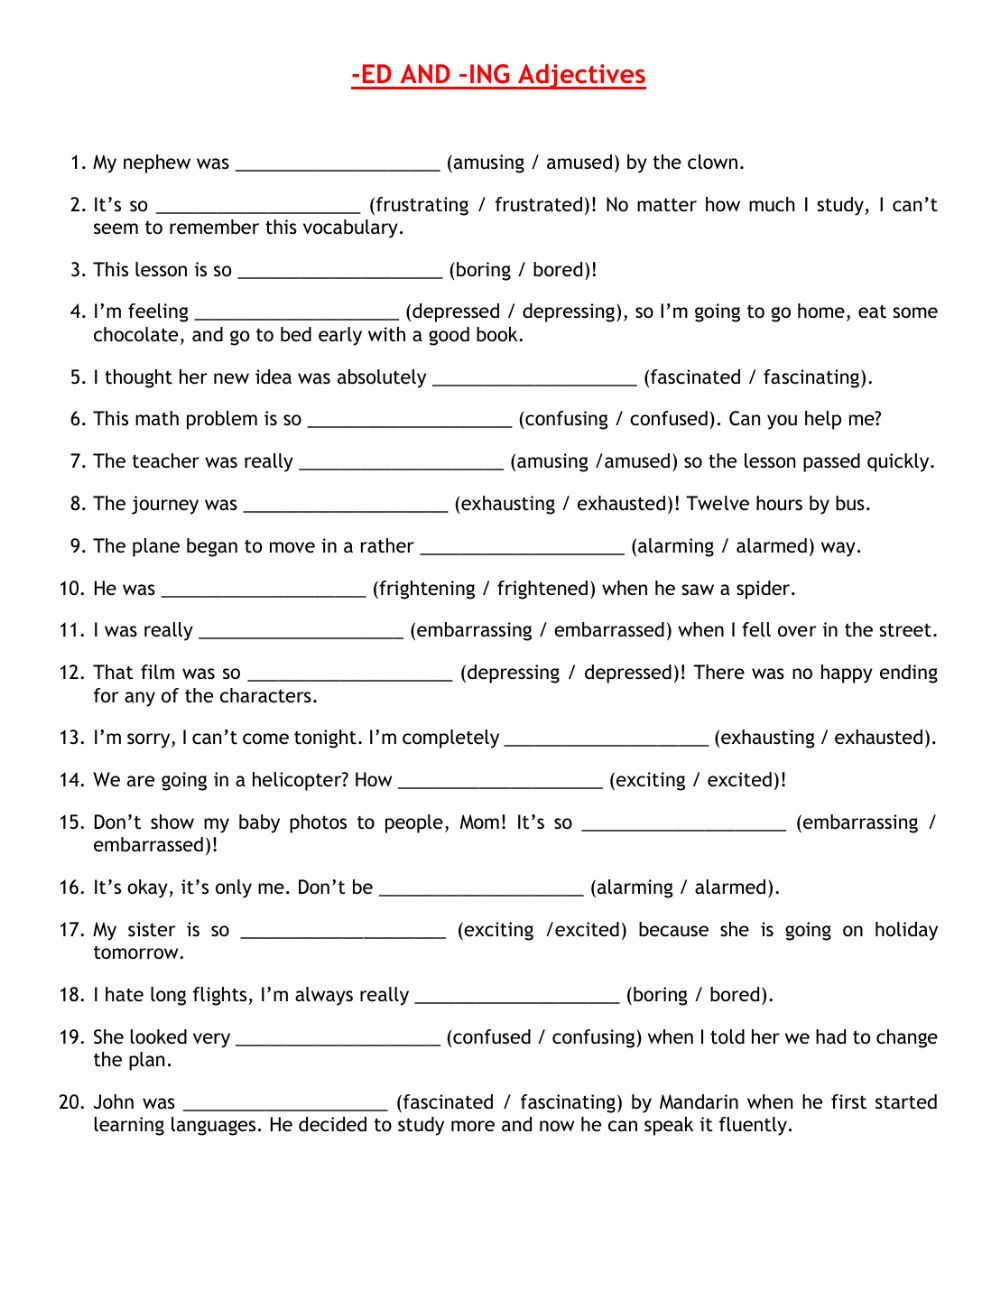 suffixes-adjectives-worksheet-adjectiveworksheets